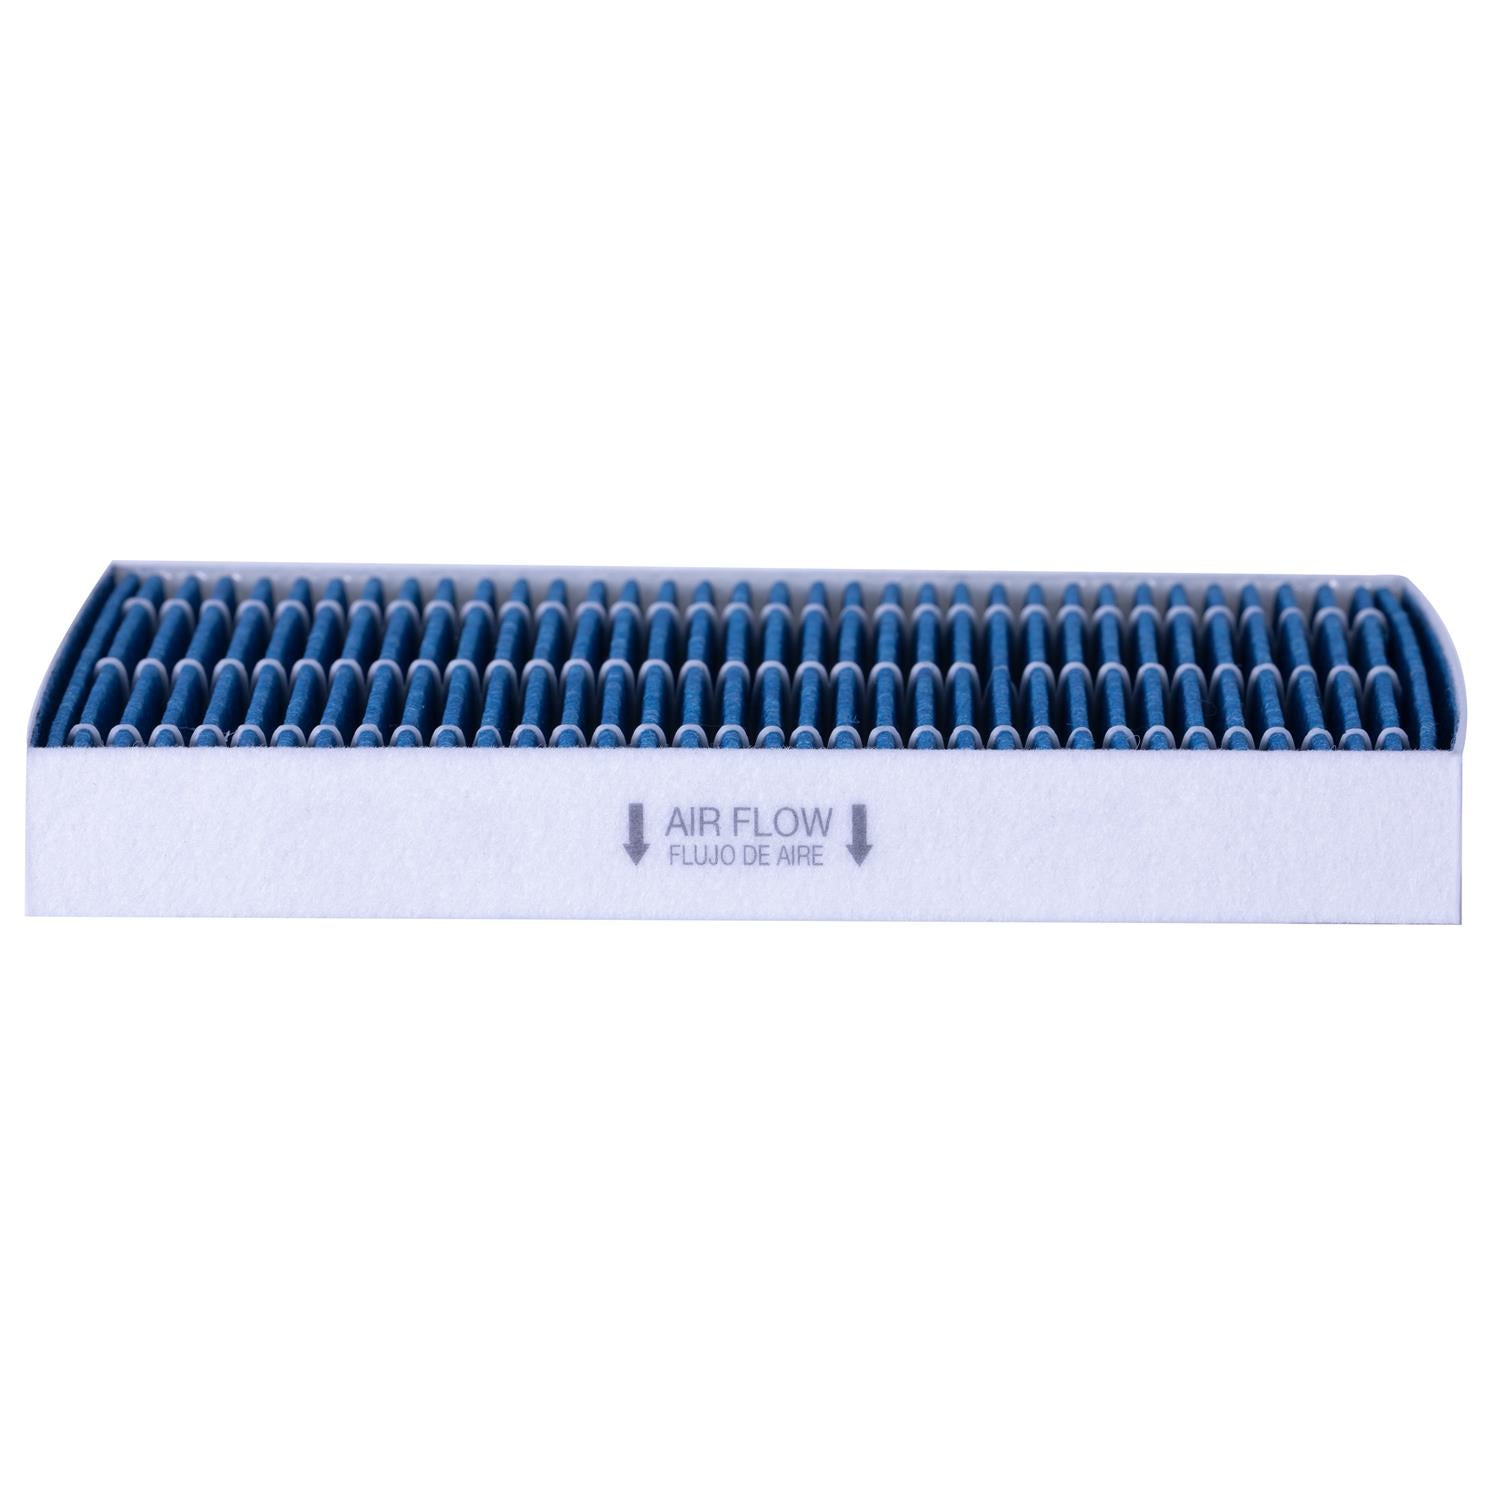 PUREFLOW 2021 Volkswagen GTI Cabin Air Filter with HEPA and Antibacterial Technology, PC99204HX